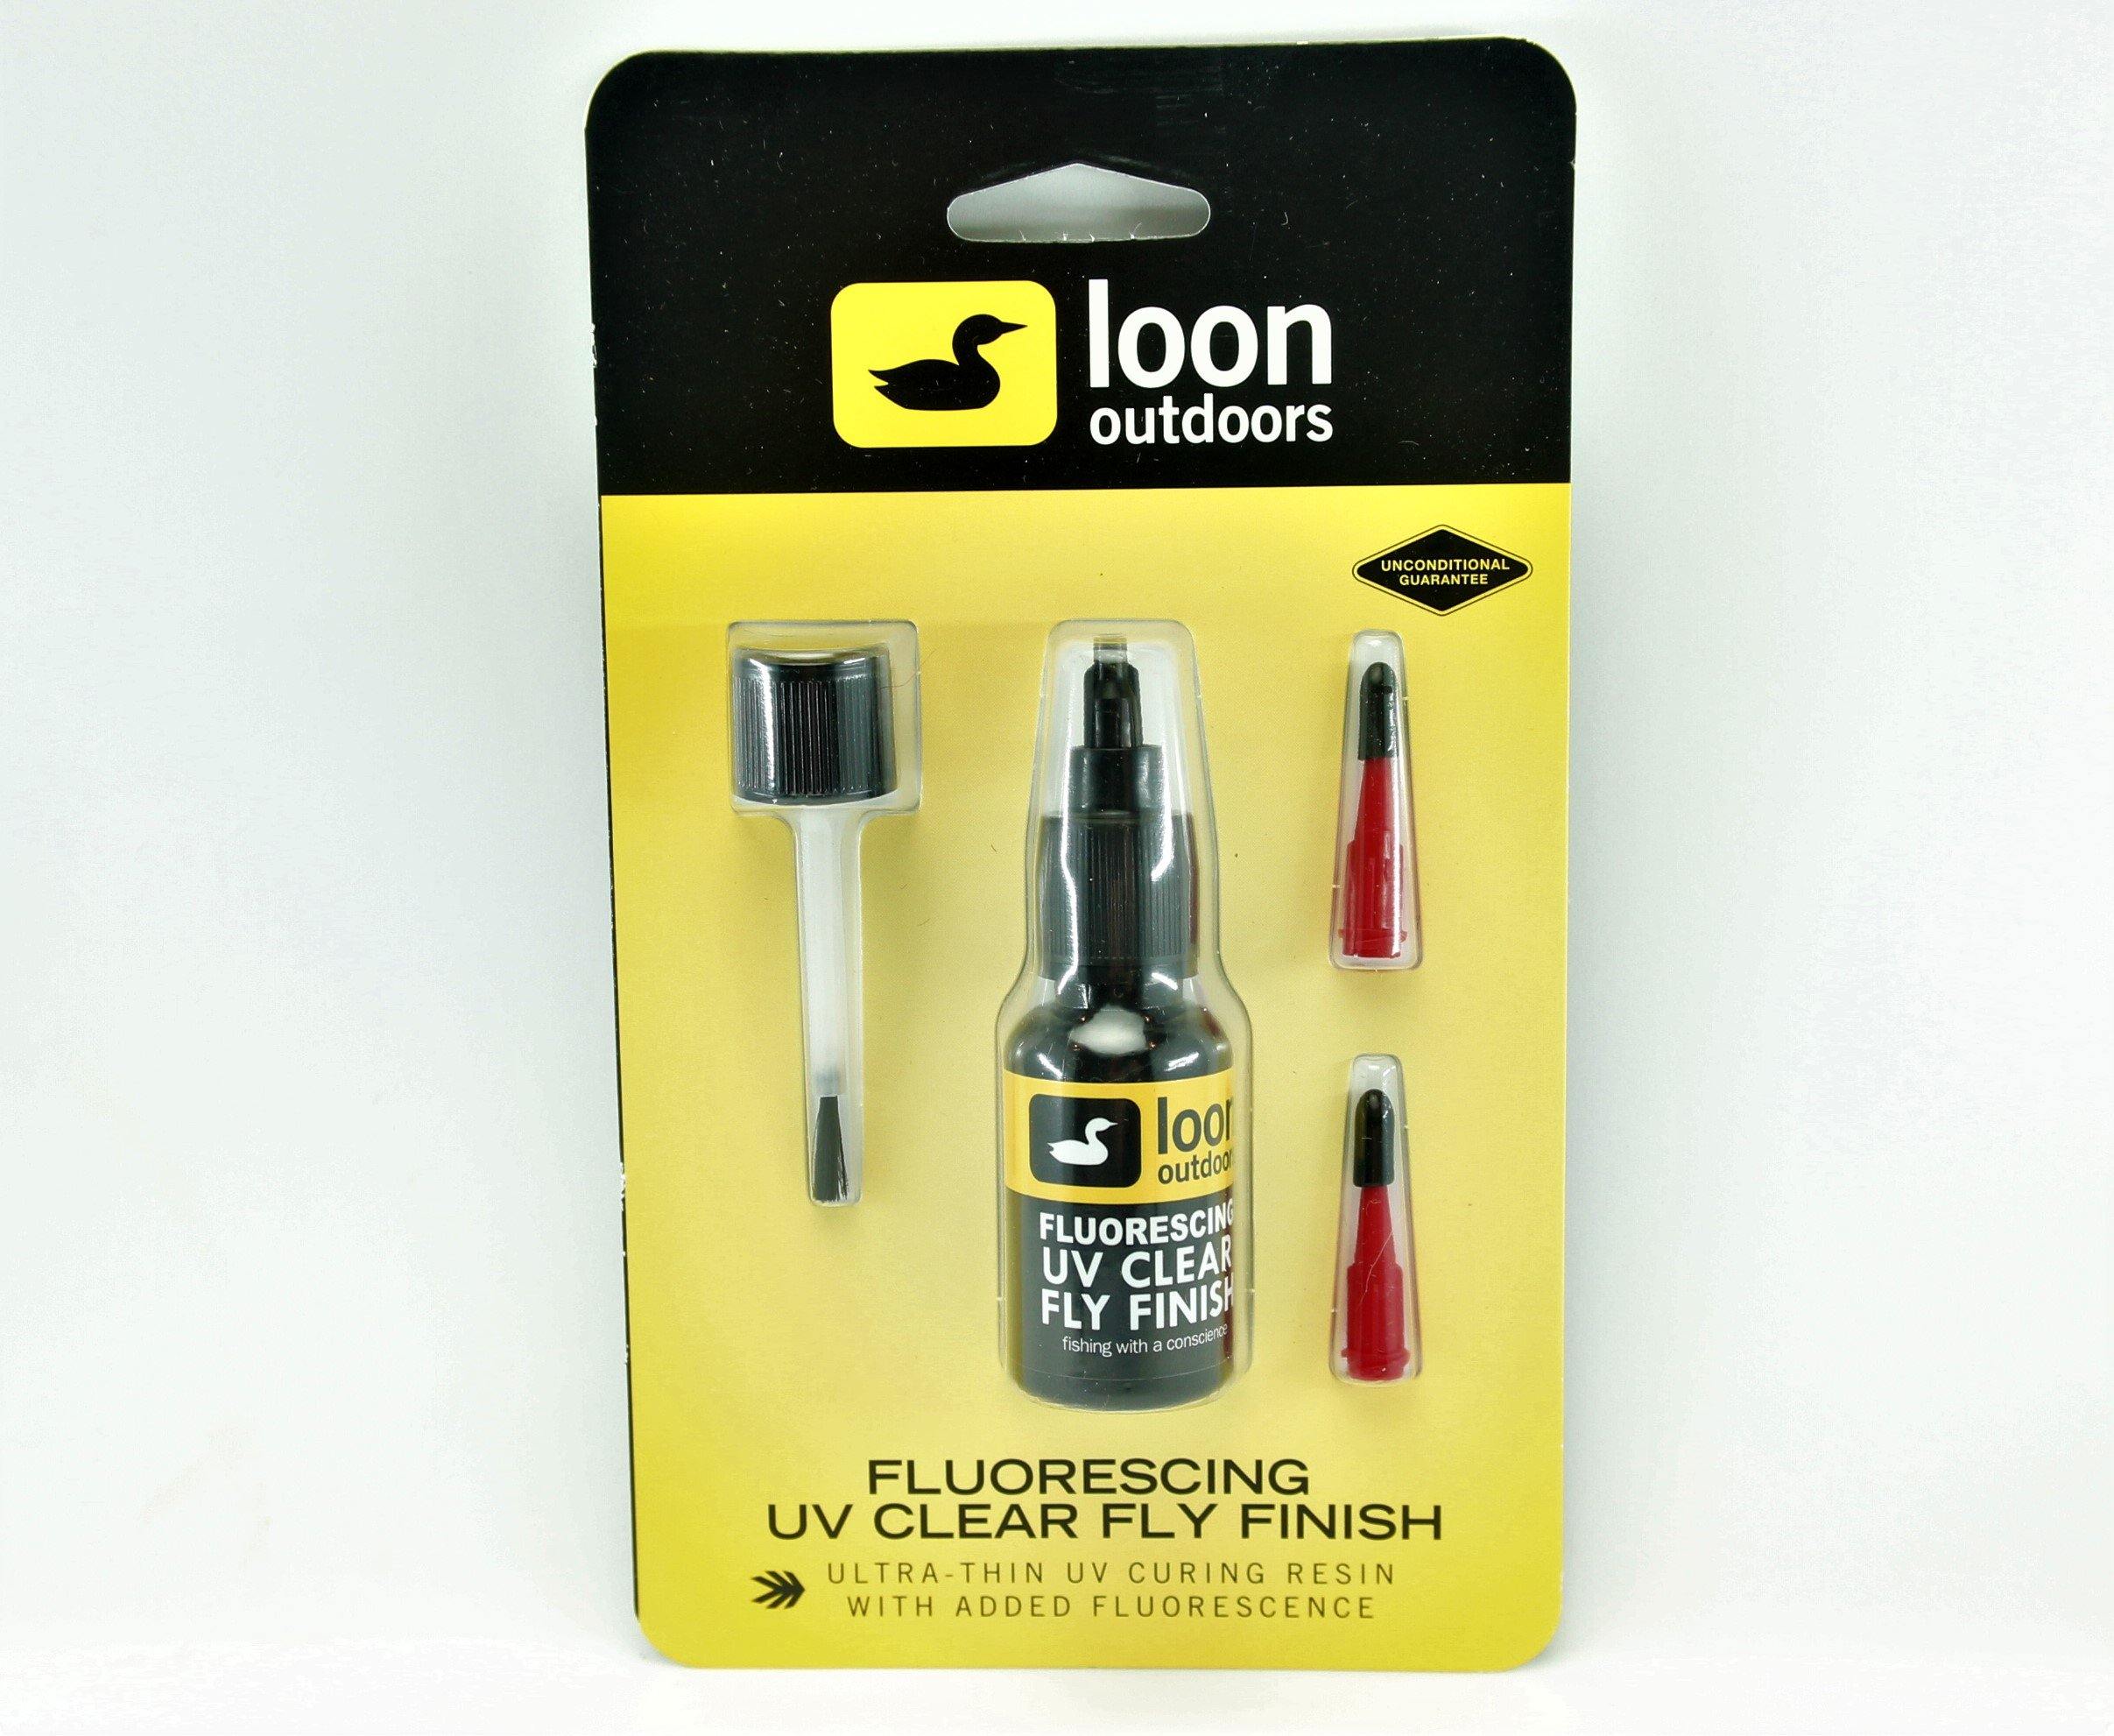 Loon Fluorescing UV Clear Fly Finish - Big T Fly Fishing